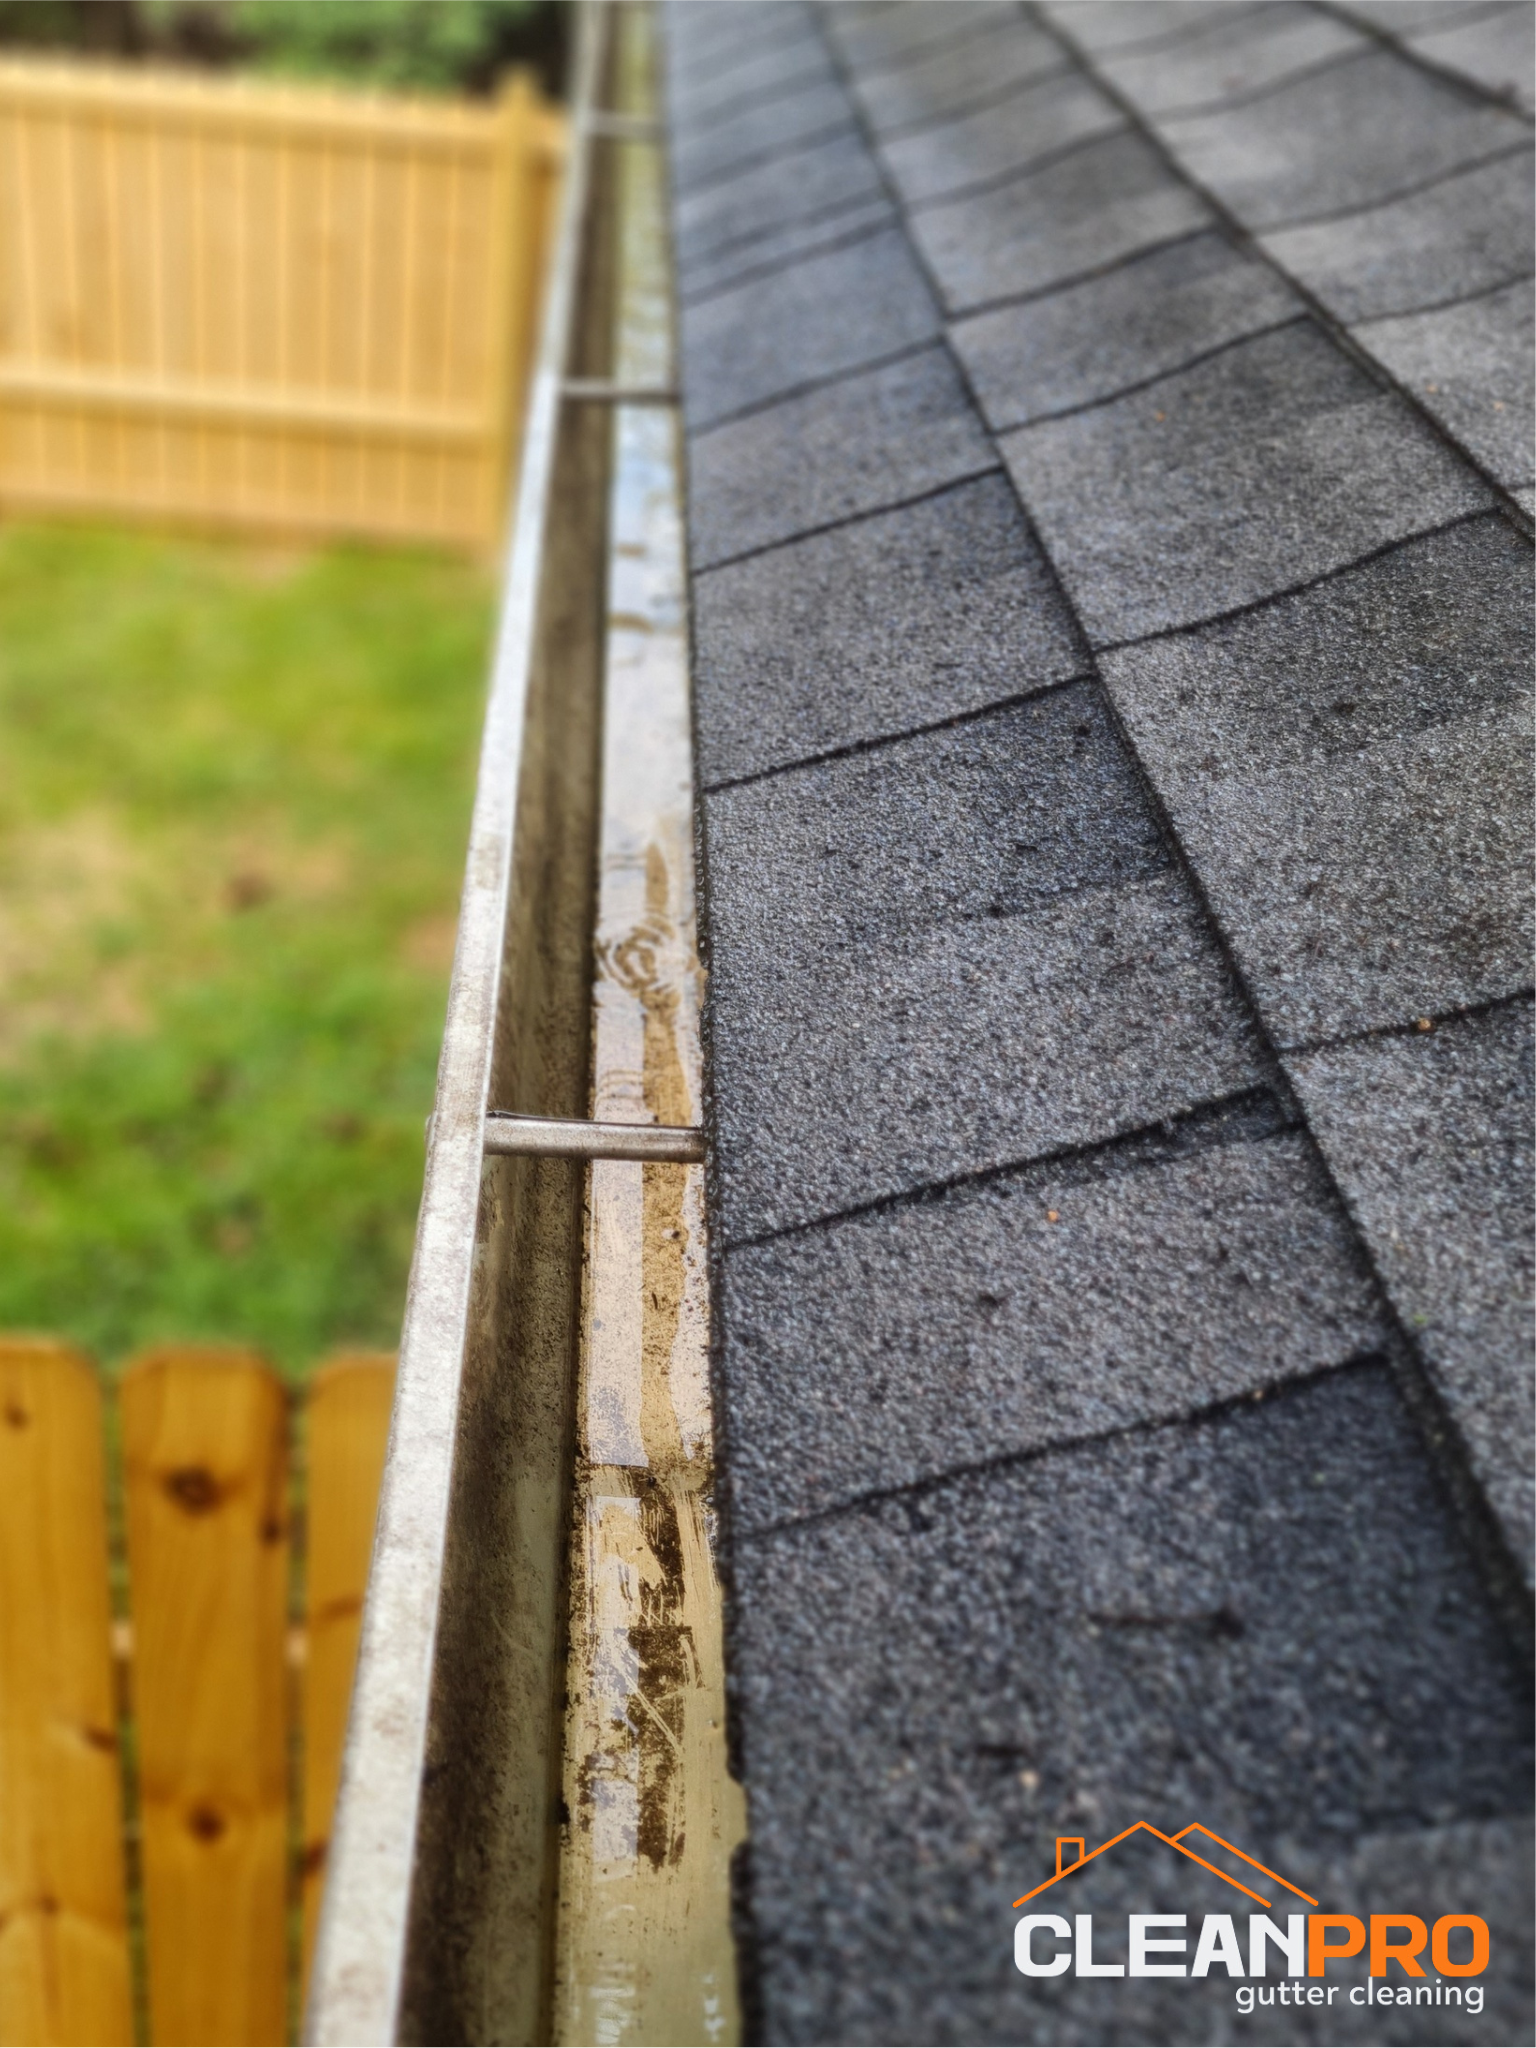 Best Gutter Cleaning Service in Knoxville